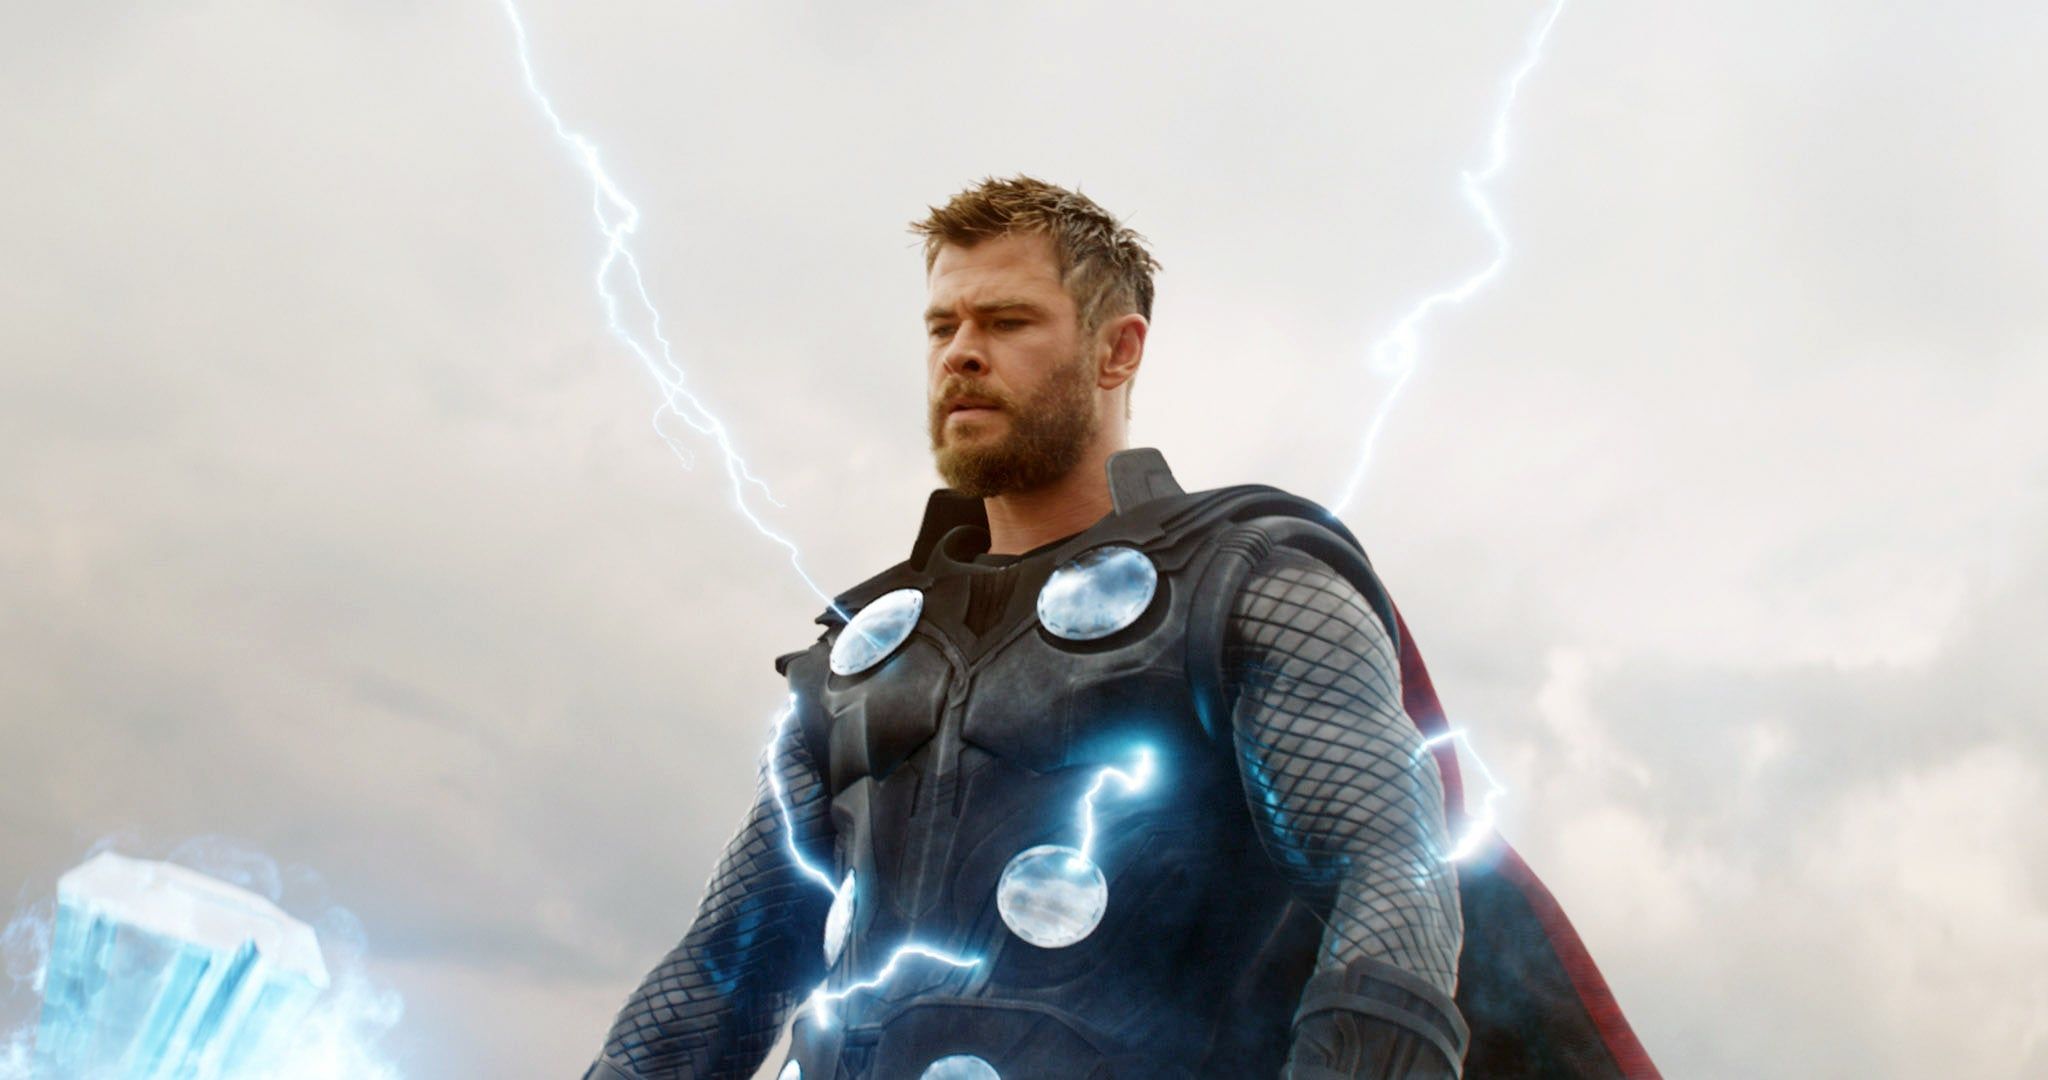 Avengers Endgame Directors' Quotes About Thor's Weight. POPSUGAR